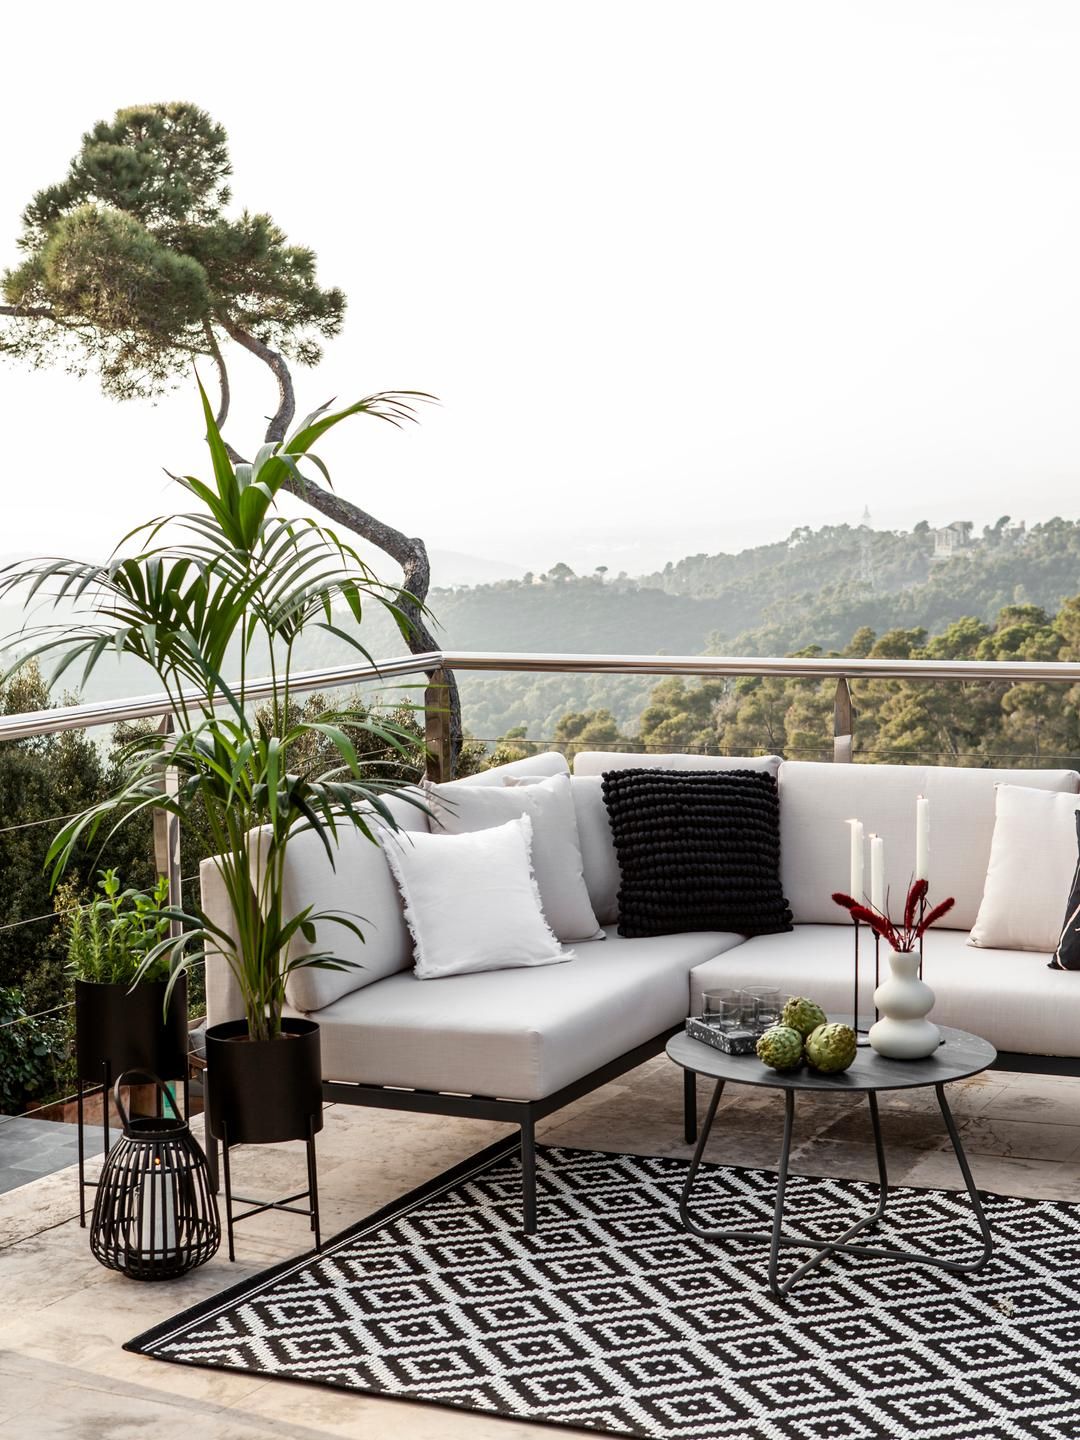 Top Trends in Outdoor Lounge Furniture
for a Stylish Patio